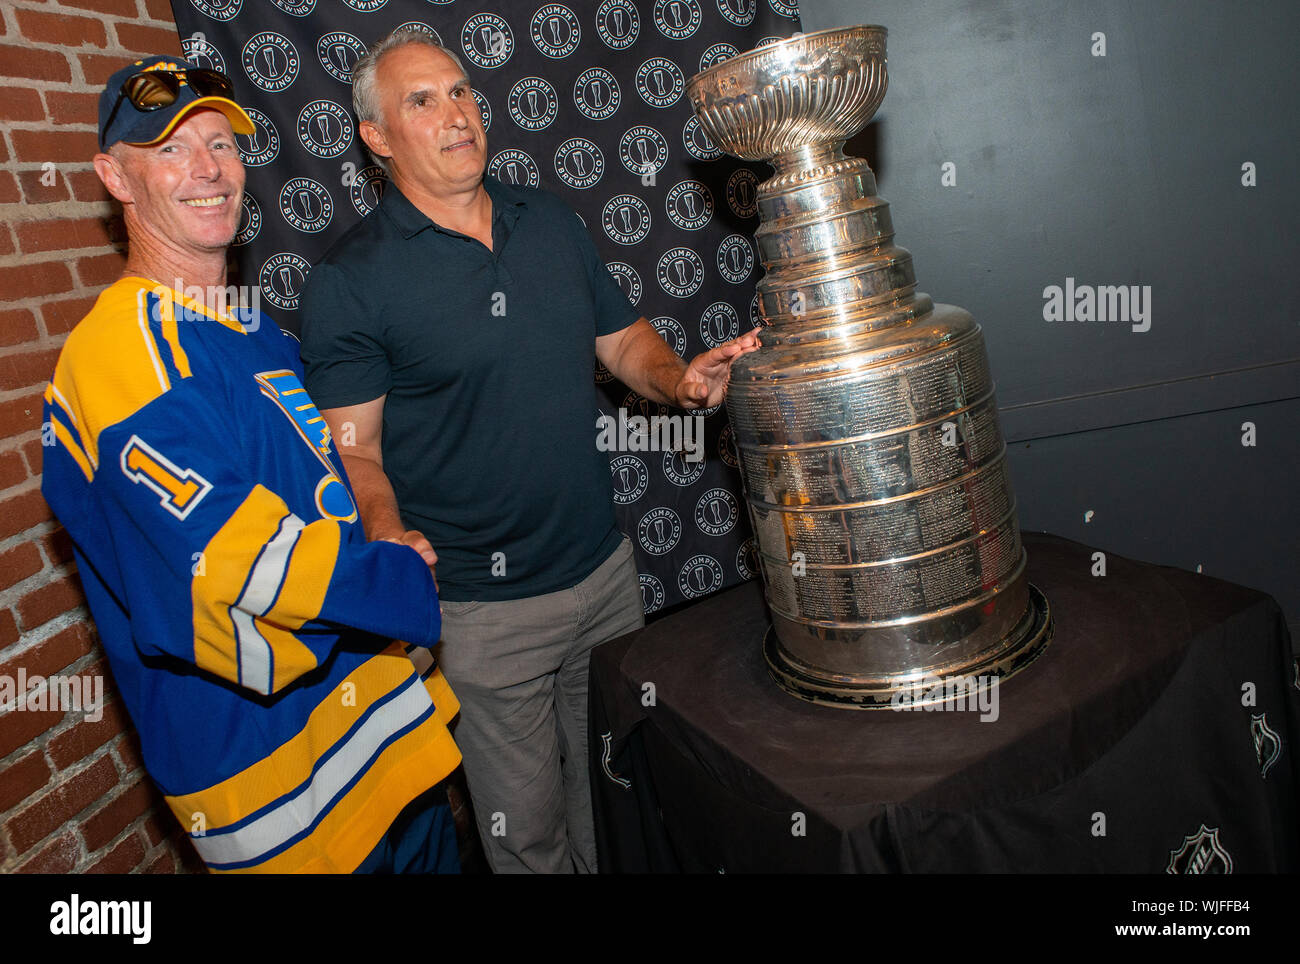 https://c8.alamy.com/comp/WJFFB4/donald-bourbon-left-of-shamong-new-jersey-poses-with-stanley-cup-champion-st-louis-blues-head-coach-craig-berube-as-he-showed-off-the-nhls-prized-WJFFB4.jpg